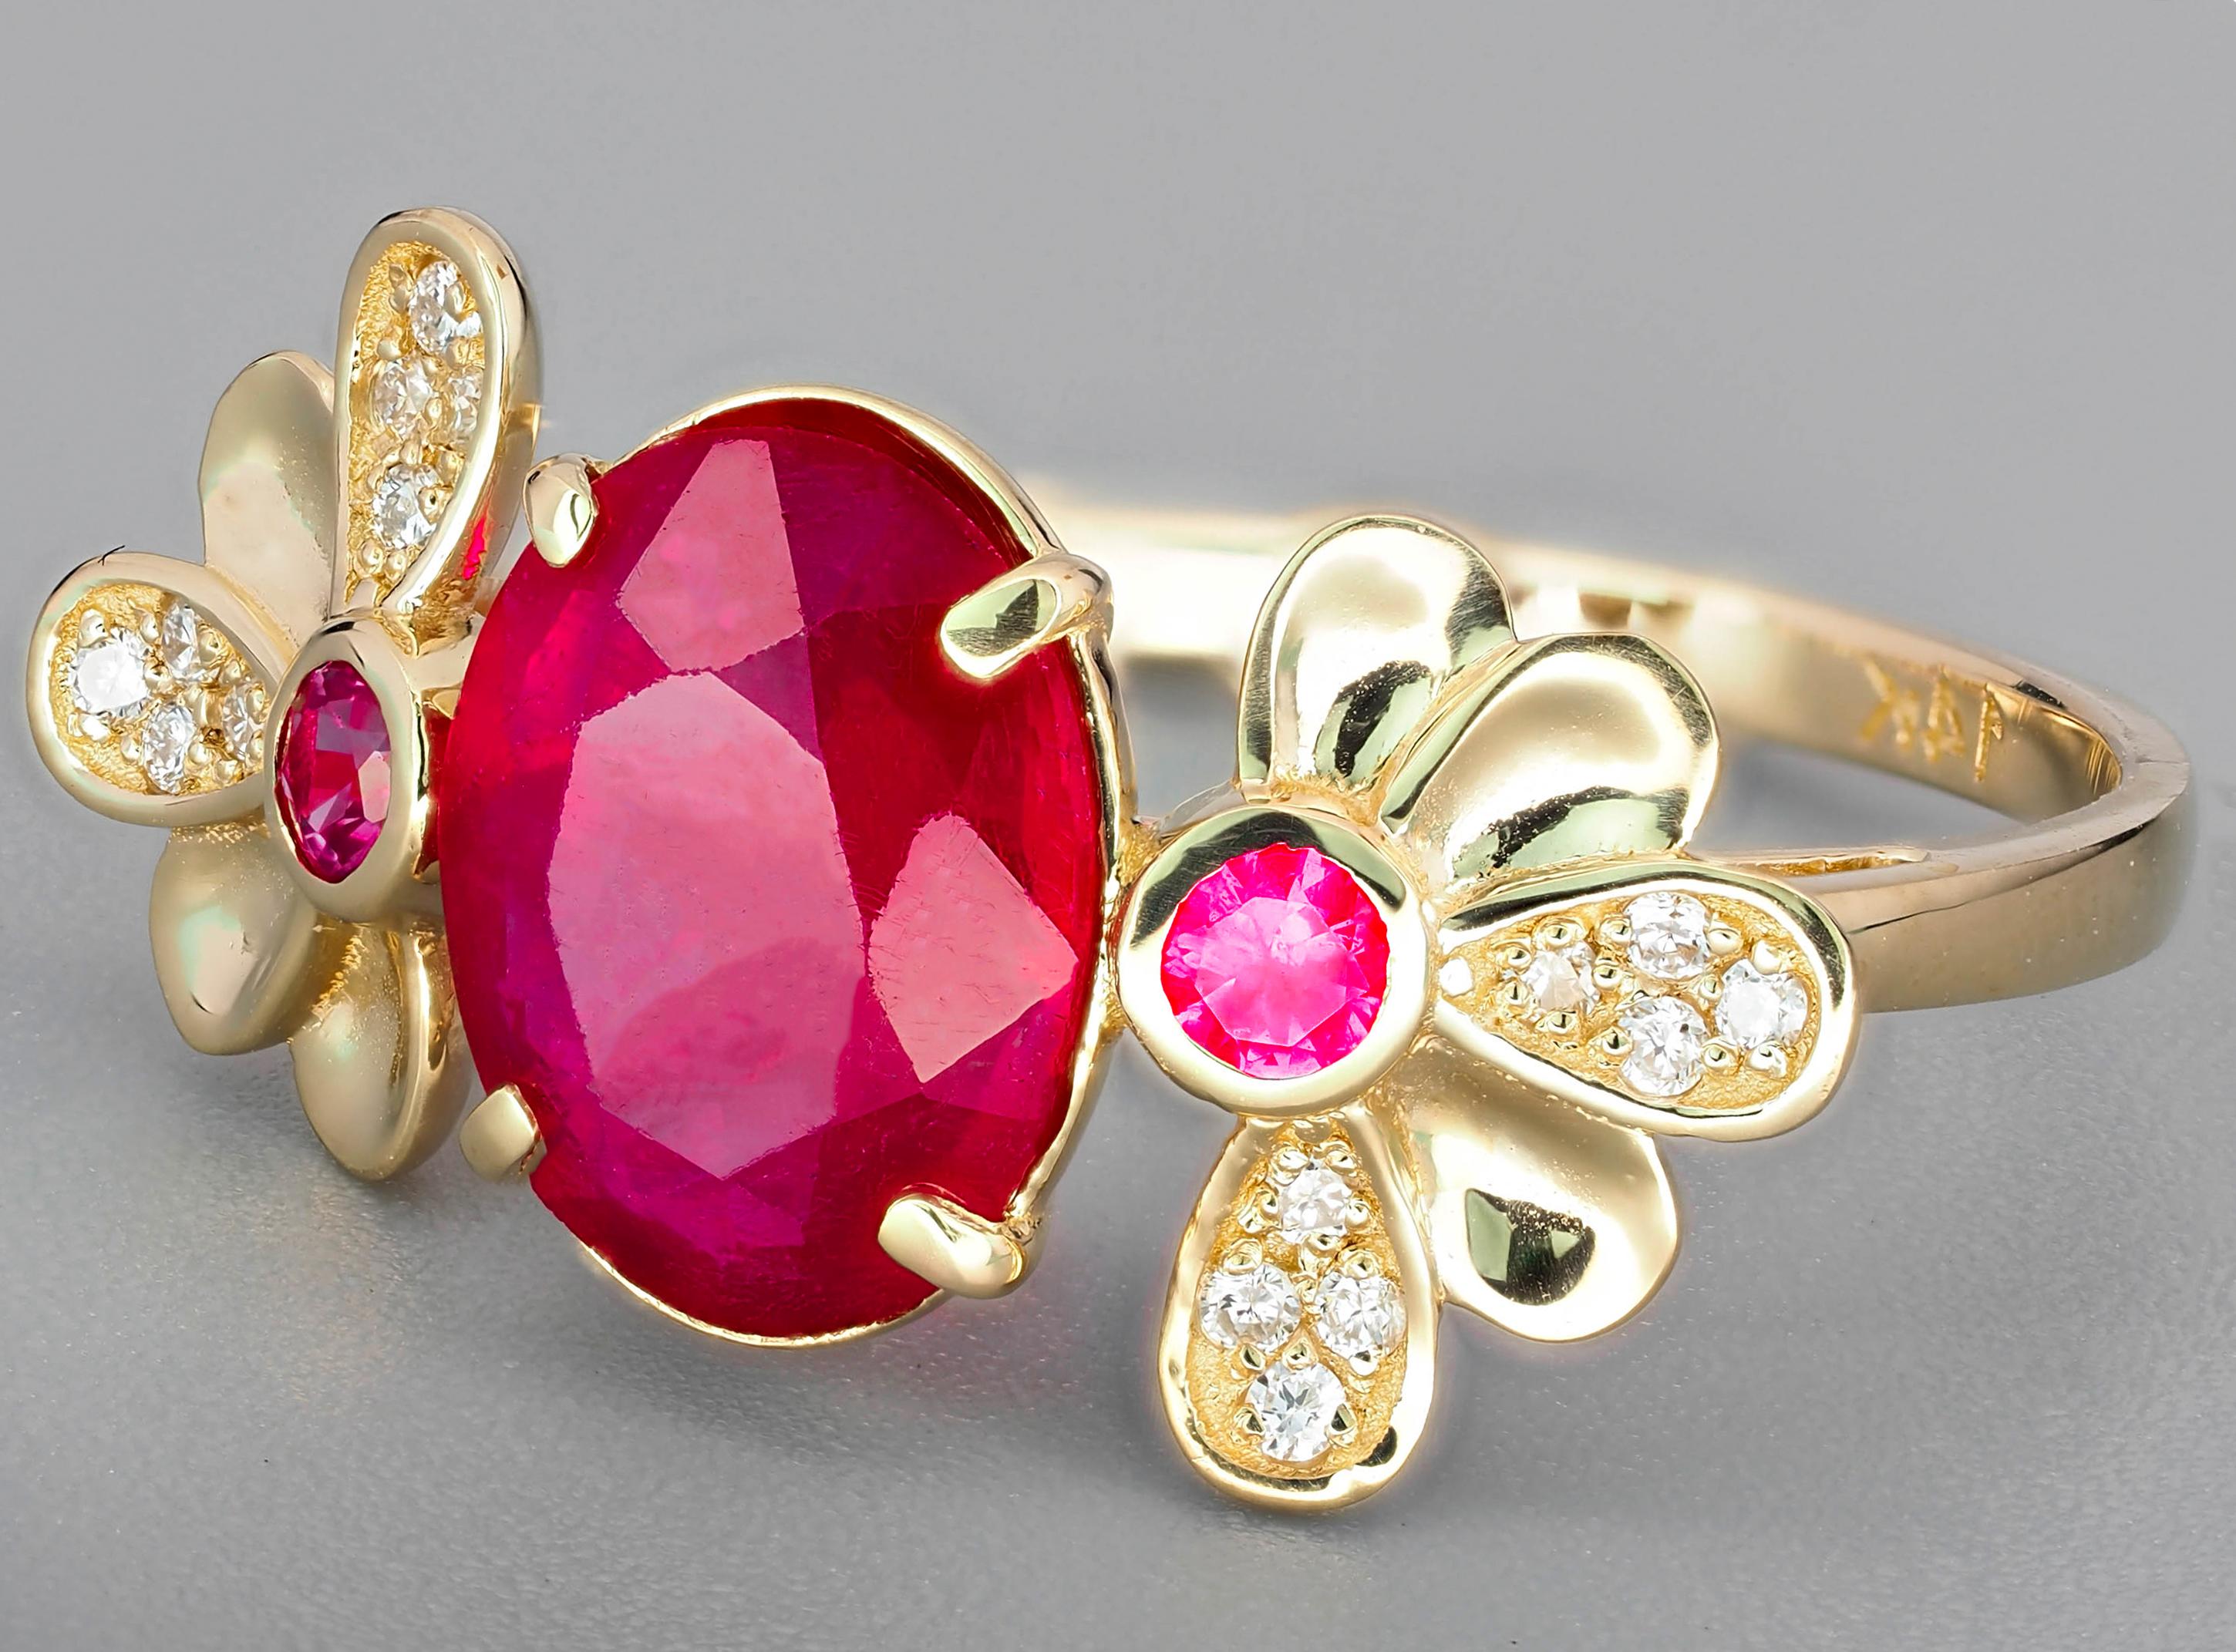 For Sale:  14 Karat Gold Ring with Ruby and Diamonds. Flower design ruby ring 7